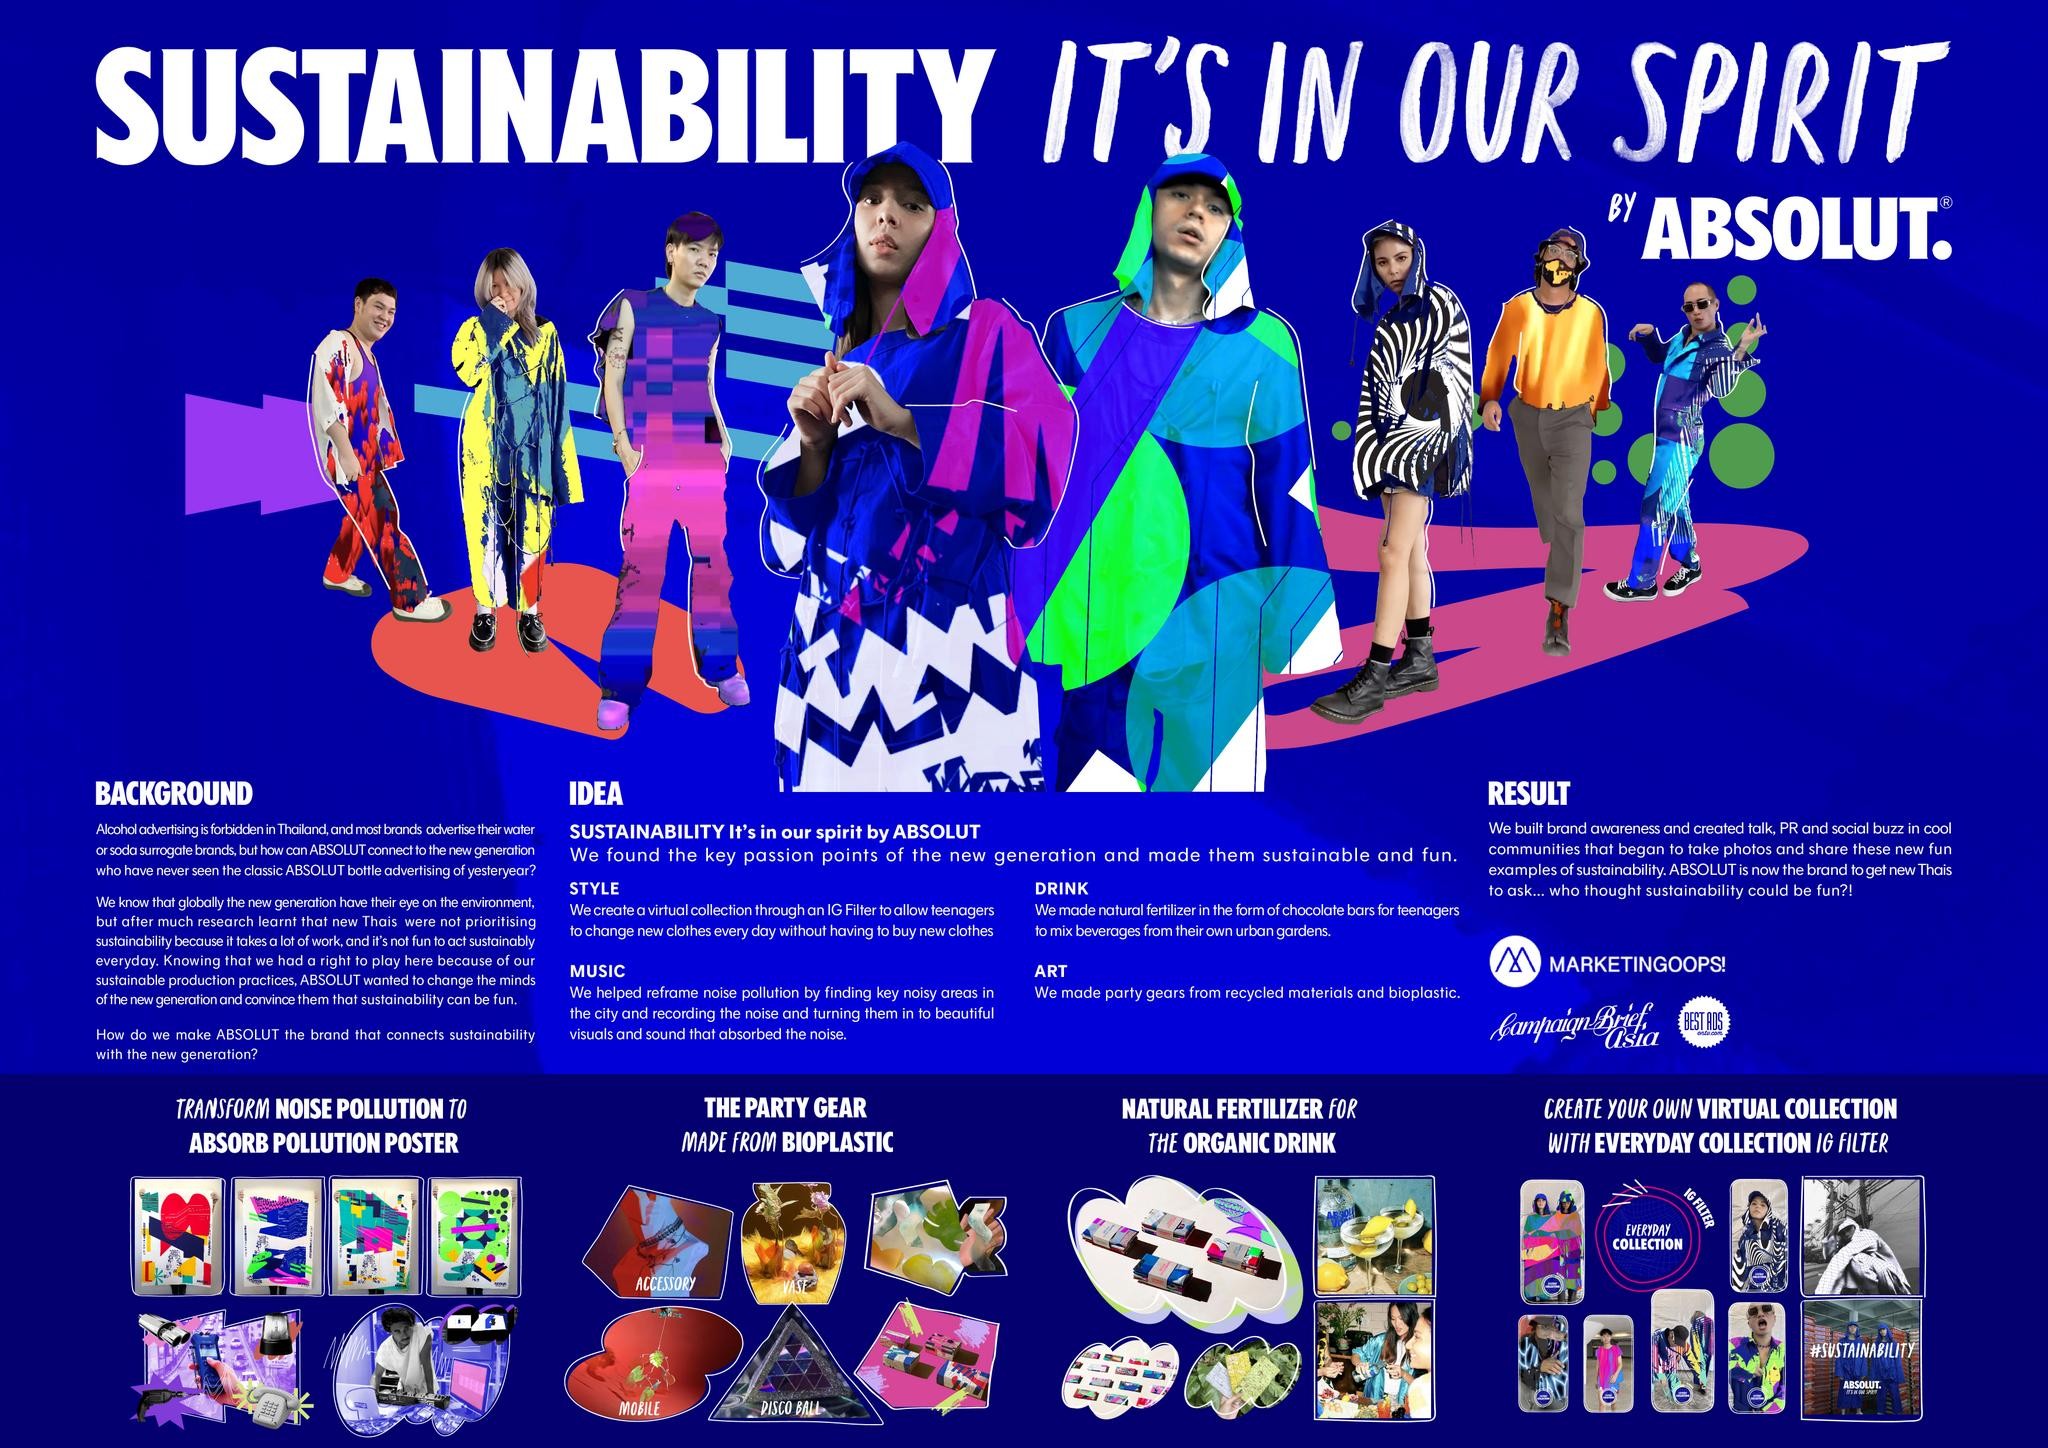 SUSTAINABILITY IT'S IN OUR SPIRIT BY ABSOLUT